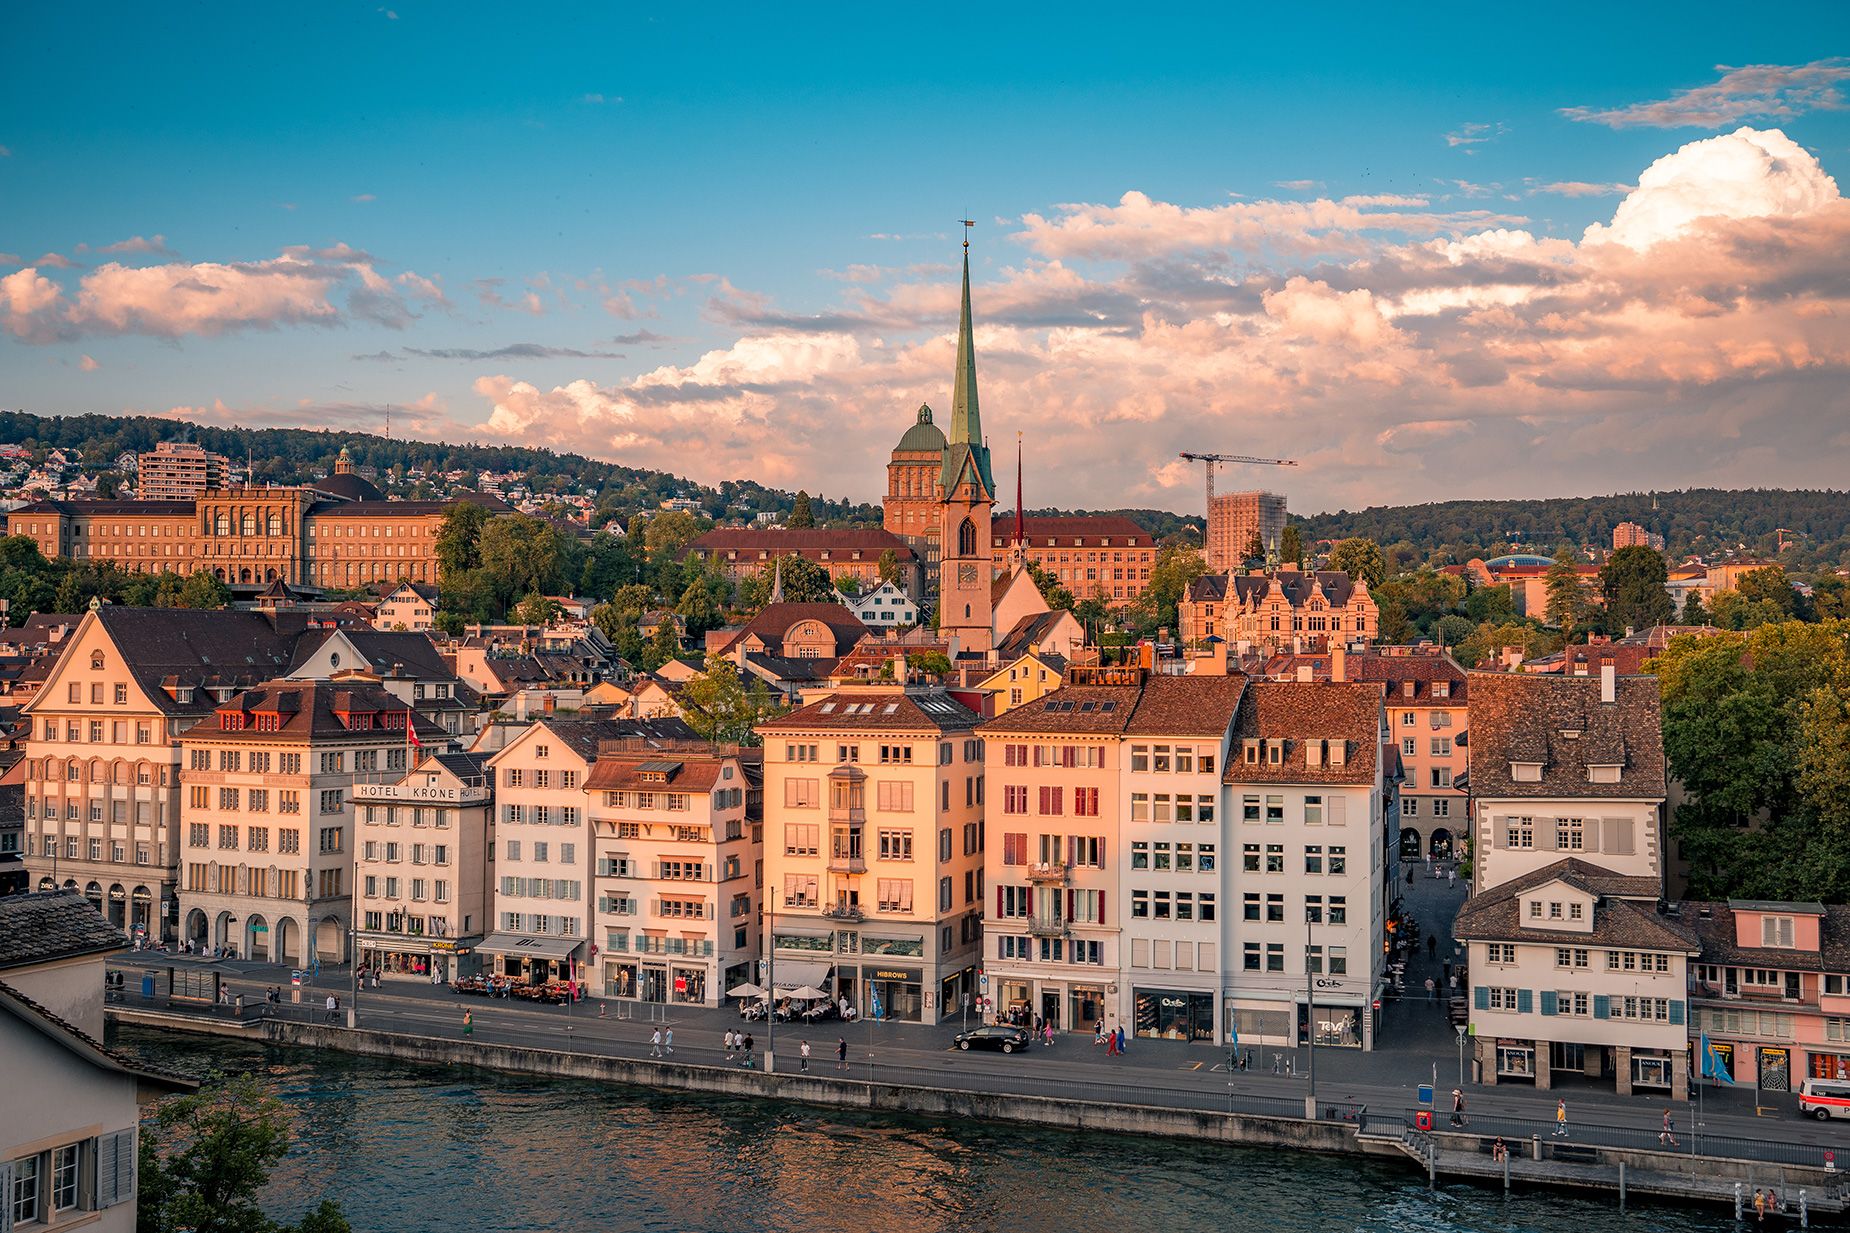 Zurich, Switzerland (pictured) tied with Singapore as the world's most expensive city on the Worldwide Cost of Living Index from the Economist Intelligence Unit.